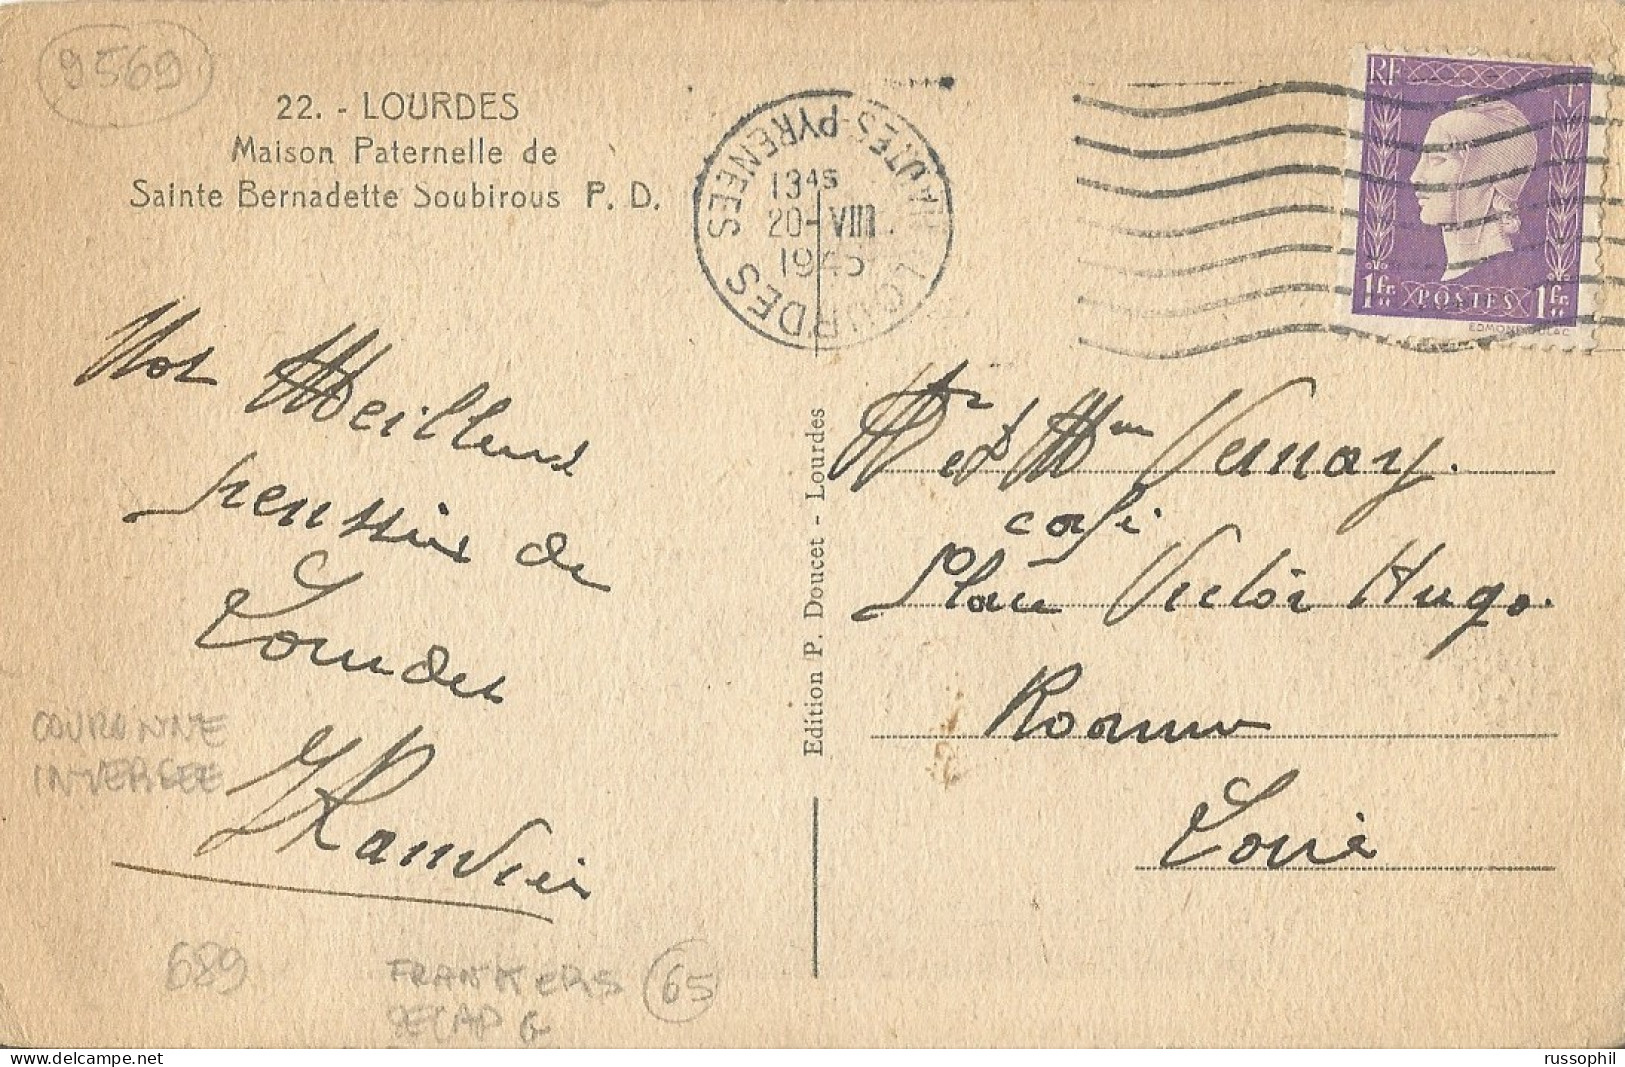 FRANCE - VARIETY &  CURIOSITY - FRANKERS SECAP G MACHINE PMK  "LOURDES"  - REVERSED  DATE BLOCK ON FRANKED PC  - 1945 - Covers & Documents